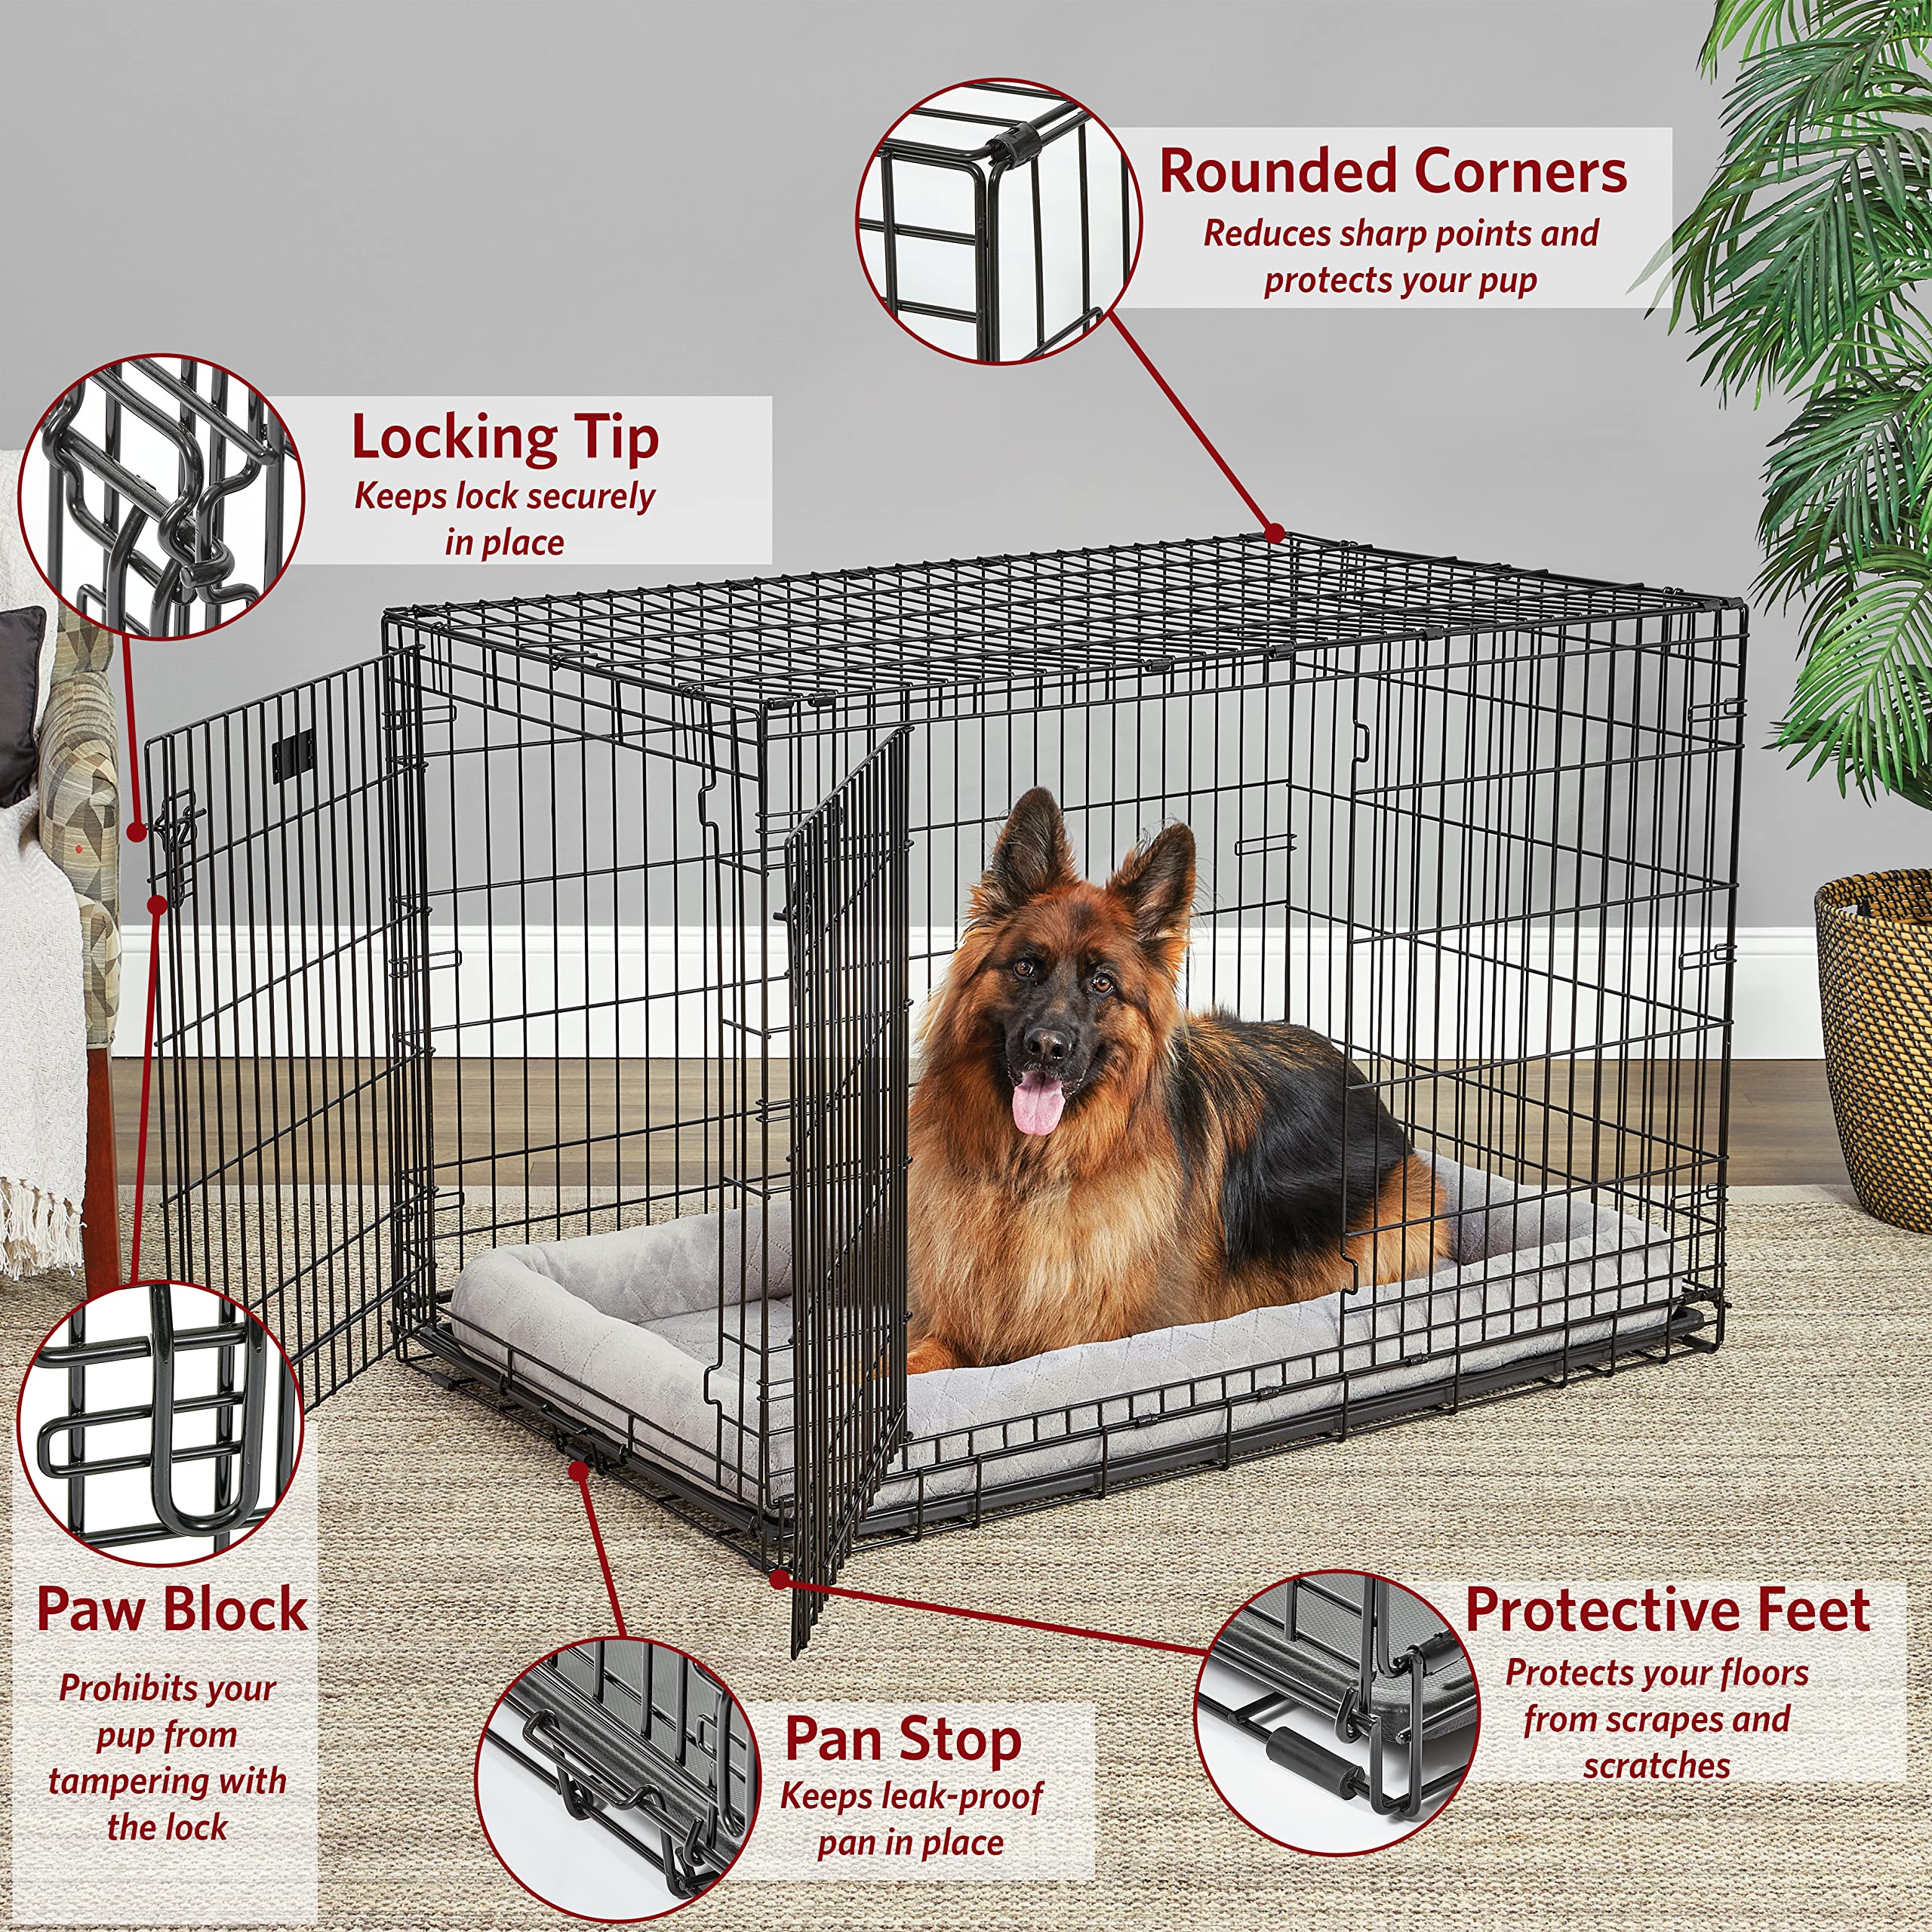 Midwest Lifestages Metal Folding Single Door Dog Crate with Divider - 48